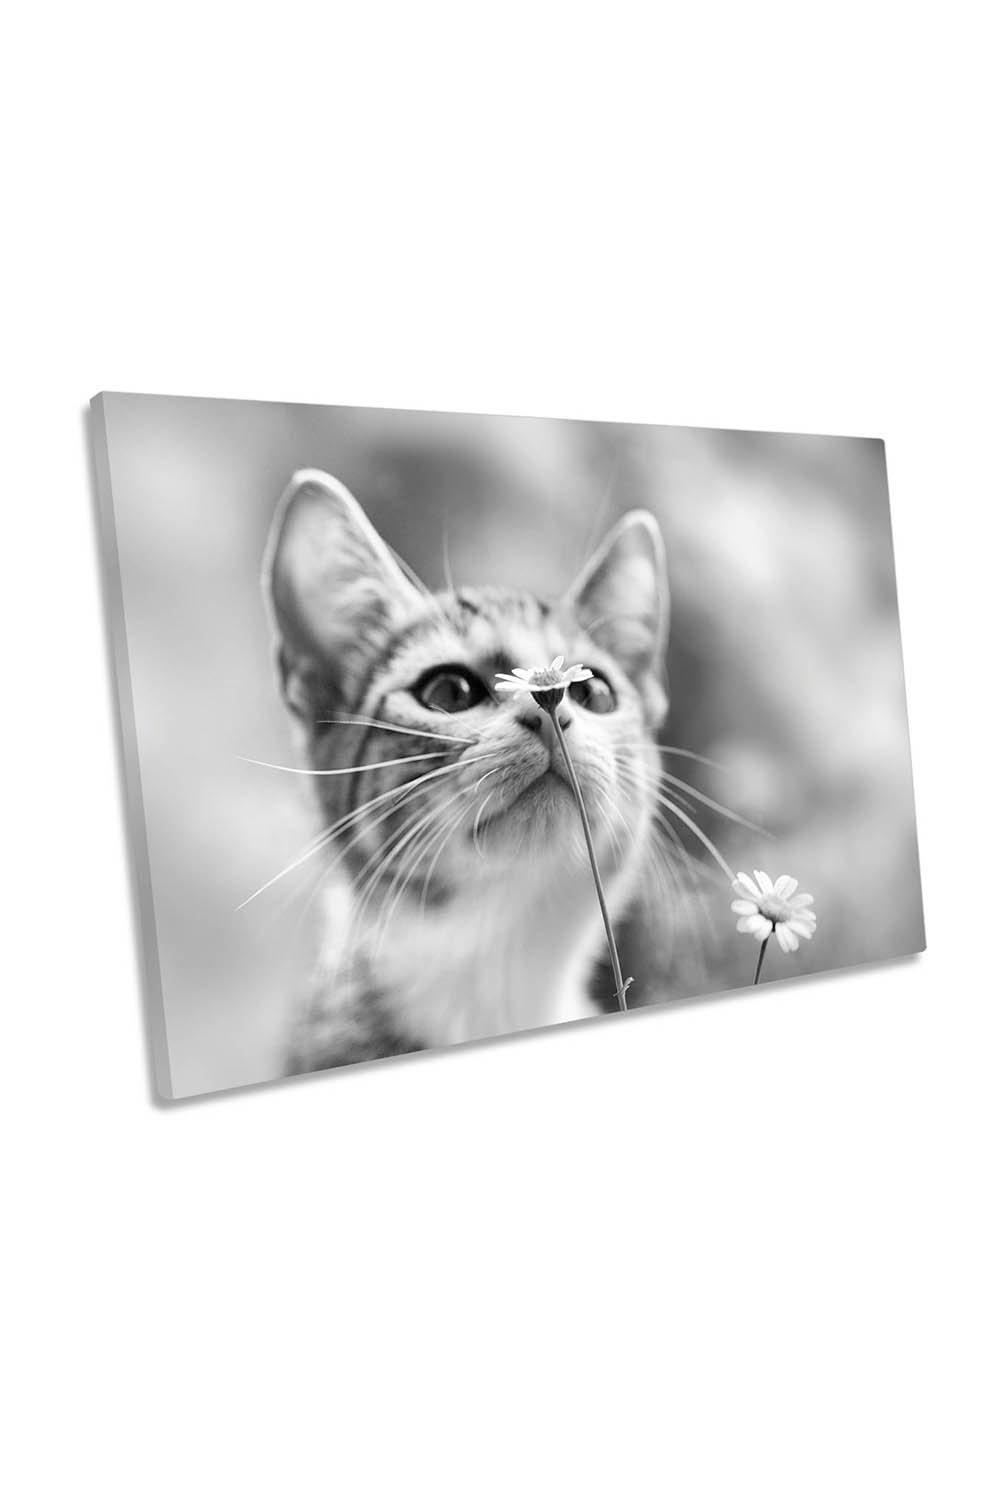 Curious Cate Kitten Flower Canvas Wall Art Picture Print